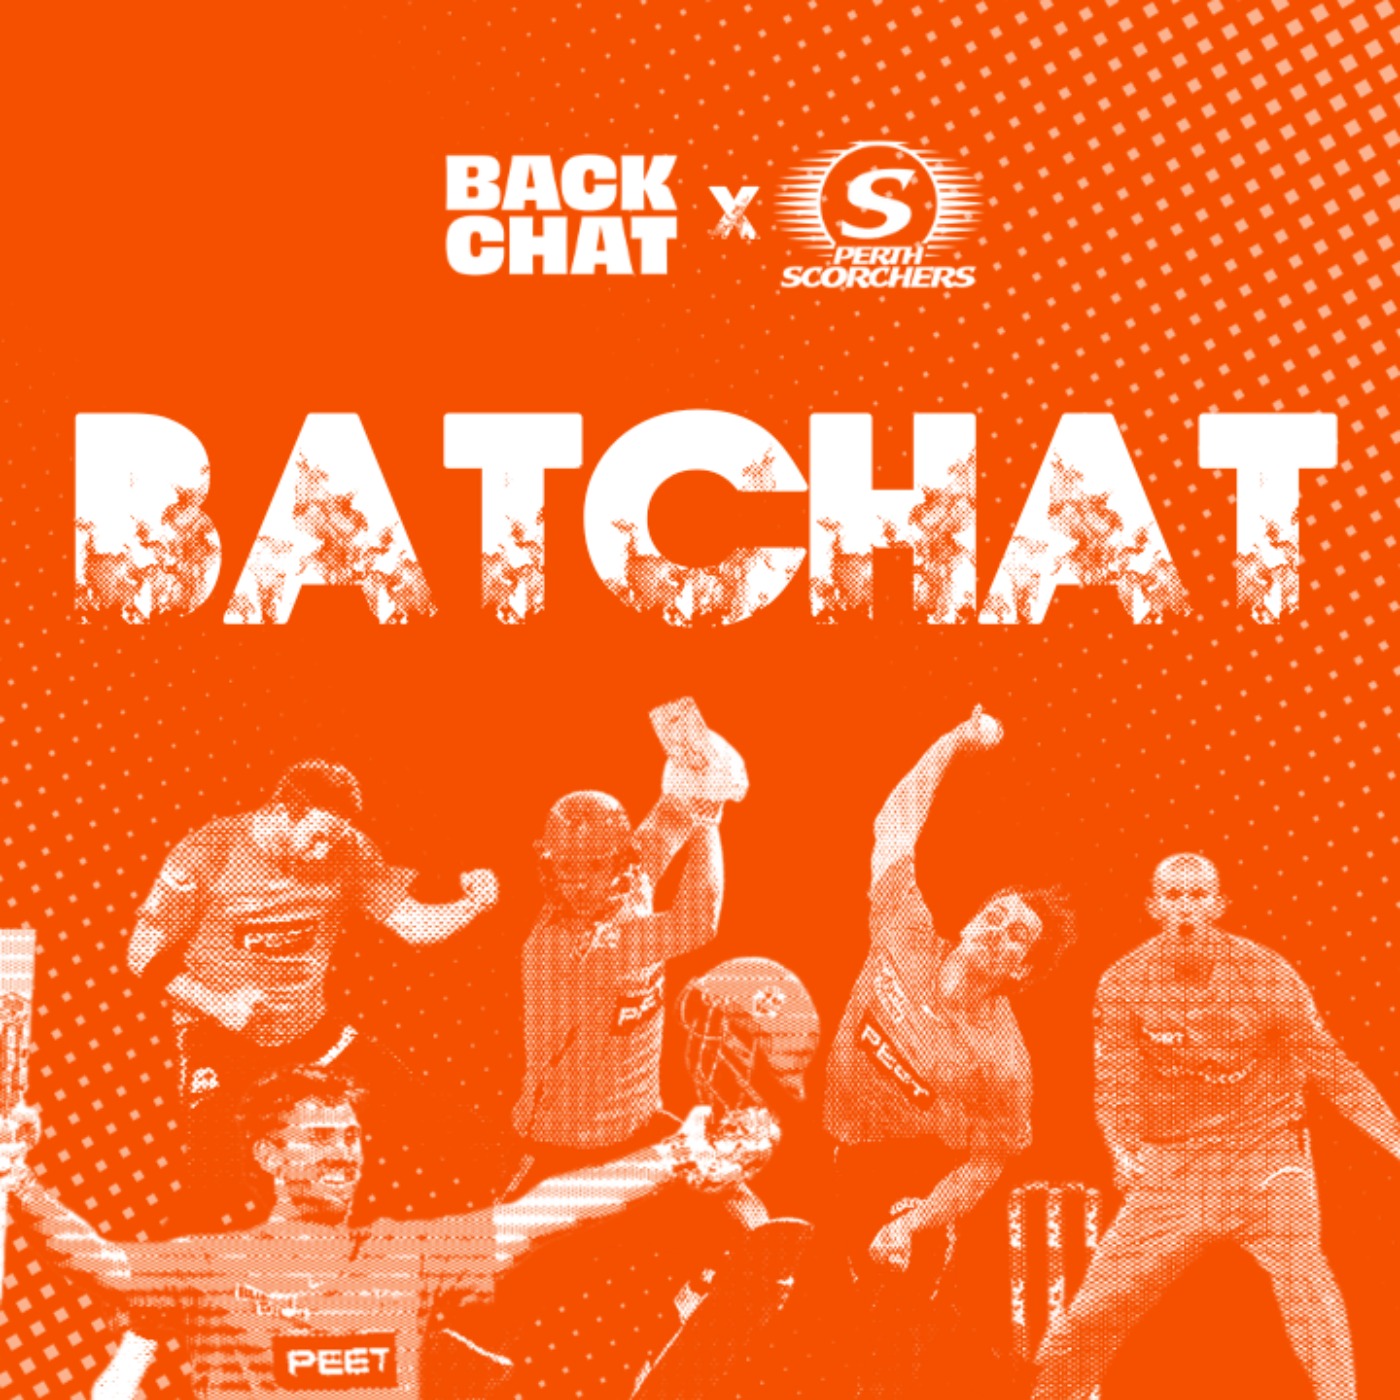 BATCHAT | The Perth Scorchers are WILD